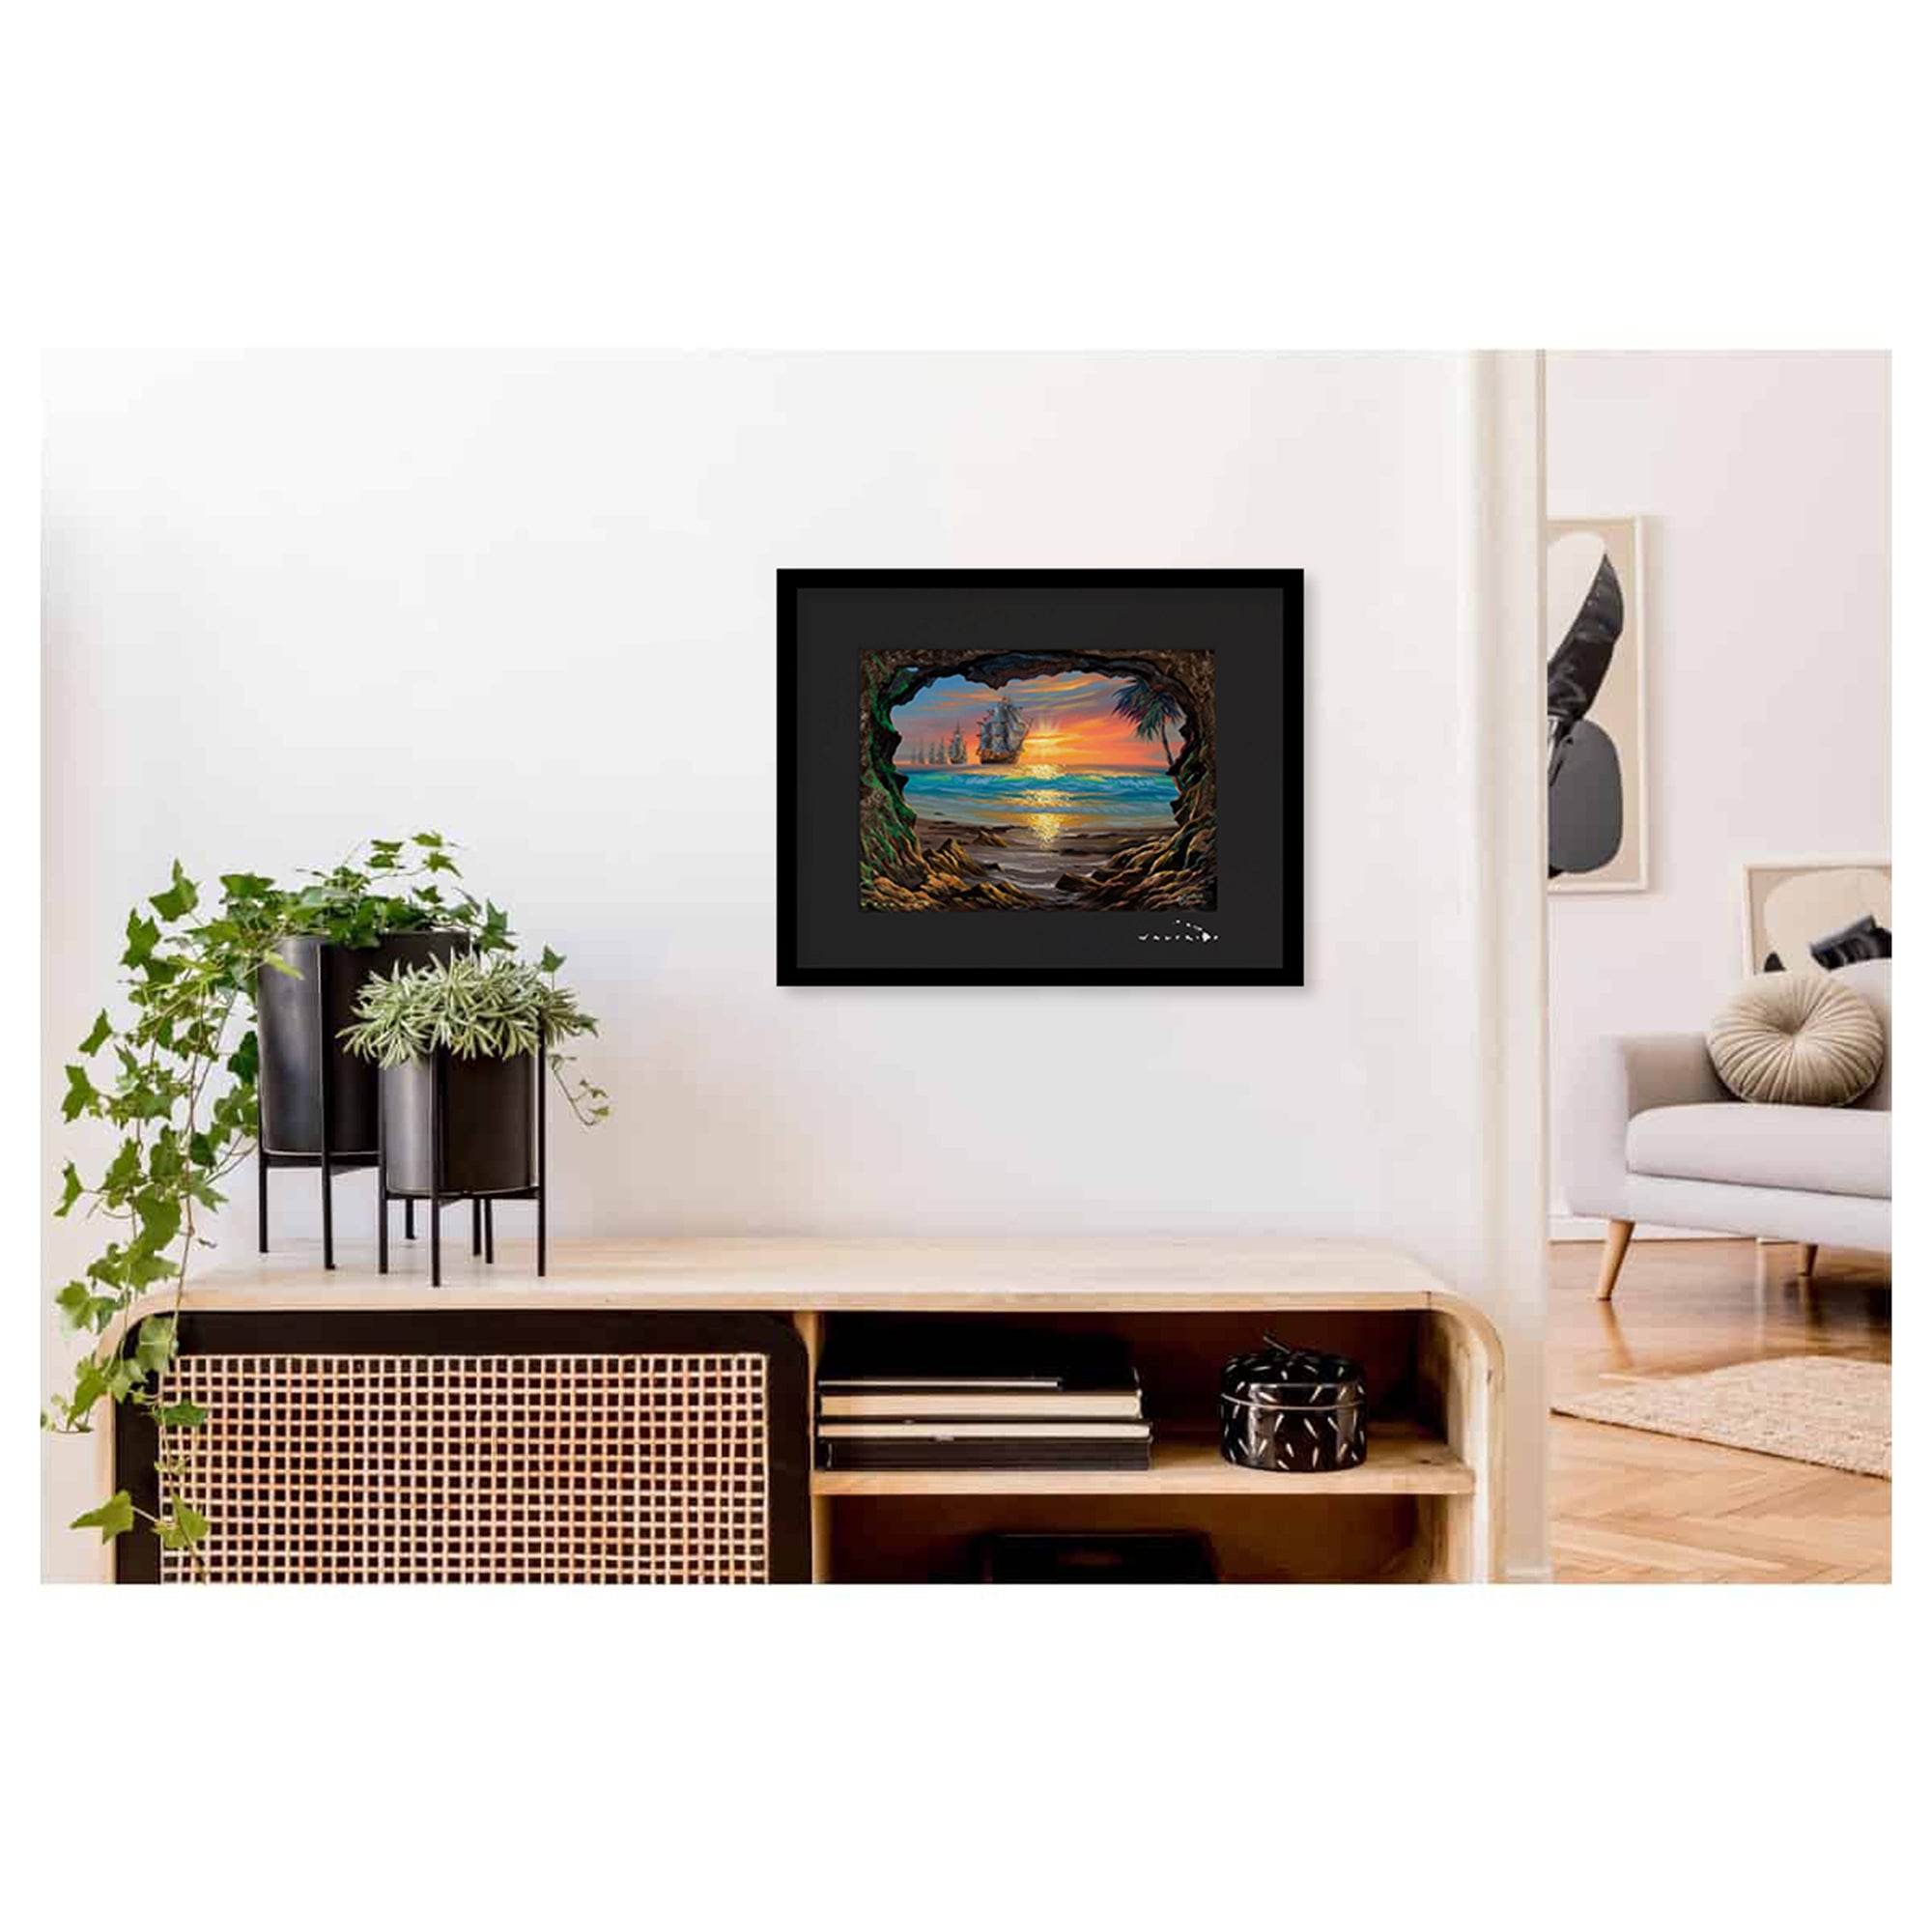 Framed matted art print featuring a cave framing vintage ships coming to the shores of Hawaii by Hawaii artist Walfrido Garcia